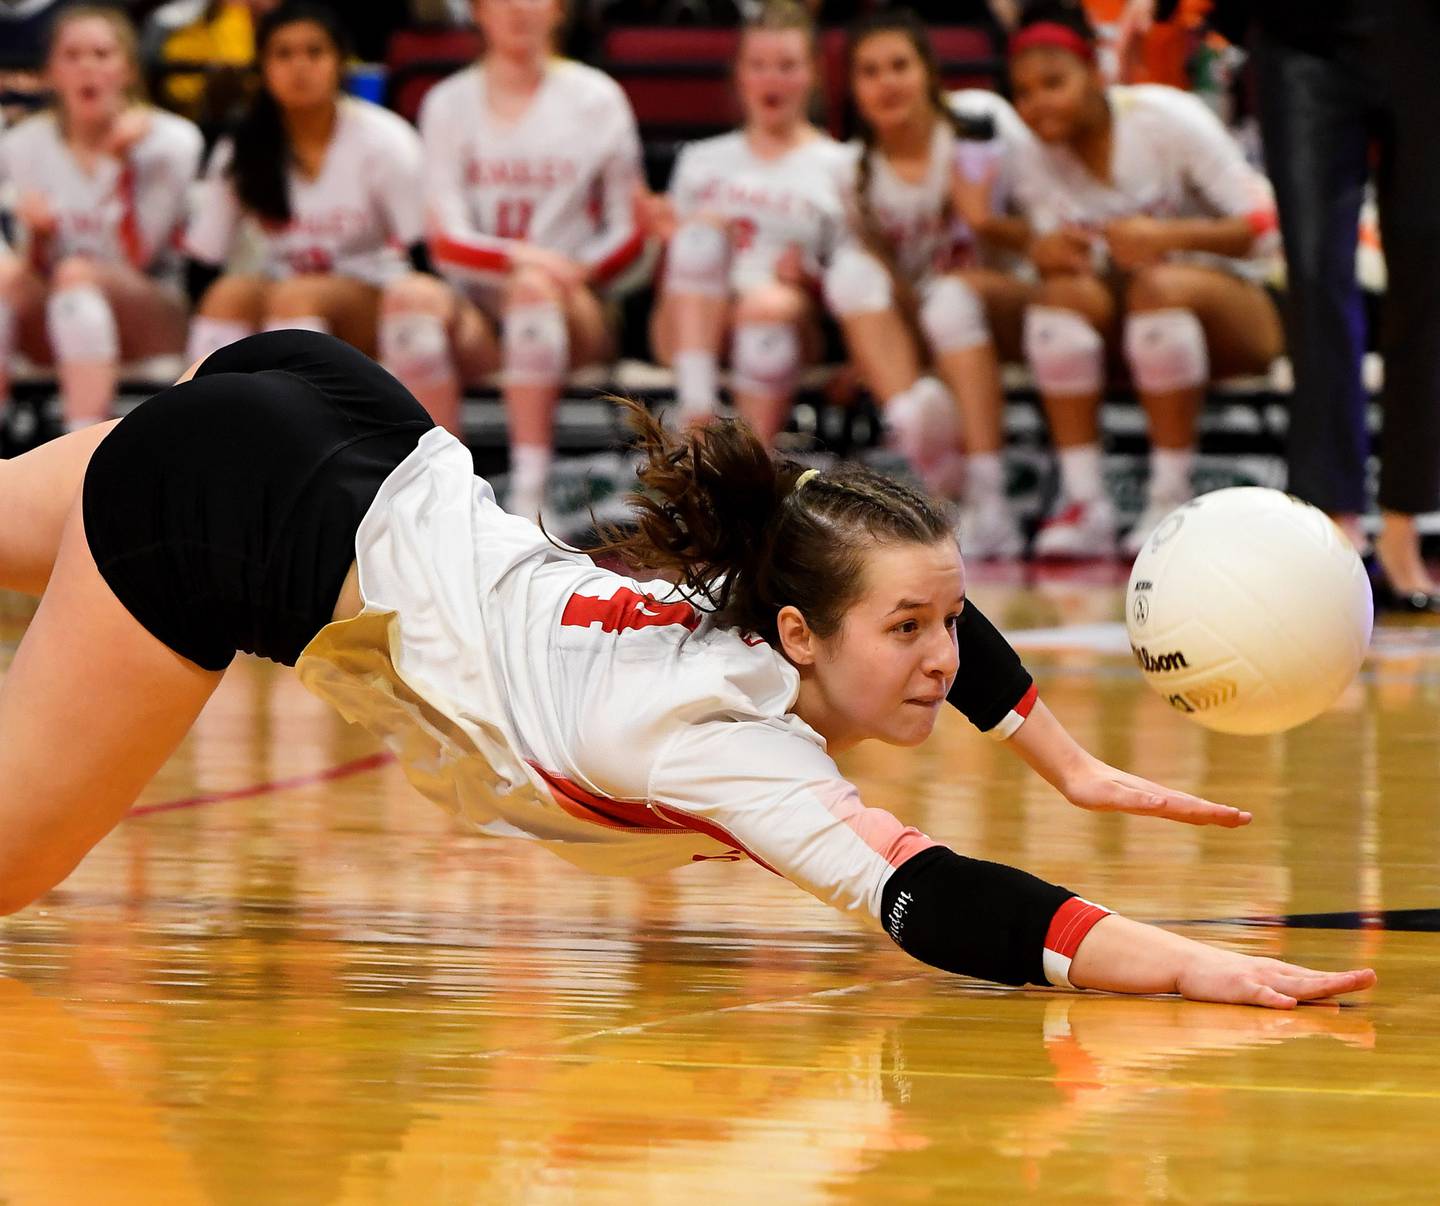 Mother McAuley's Sam Falk (4) makes a pancake save against Benet during the Class 4A state championship match at Illinois State's Redbird Arena on Saturday, Nov. 12, 2022.